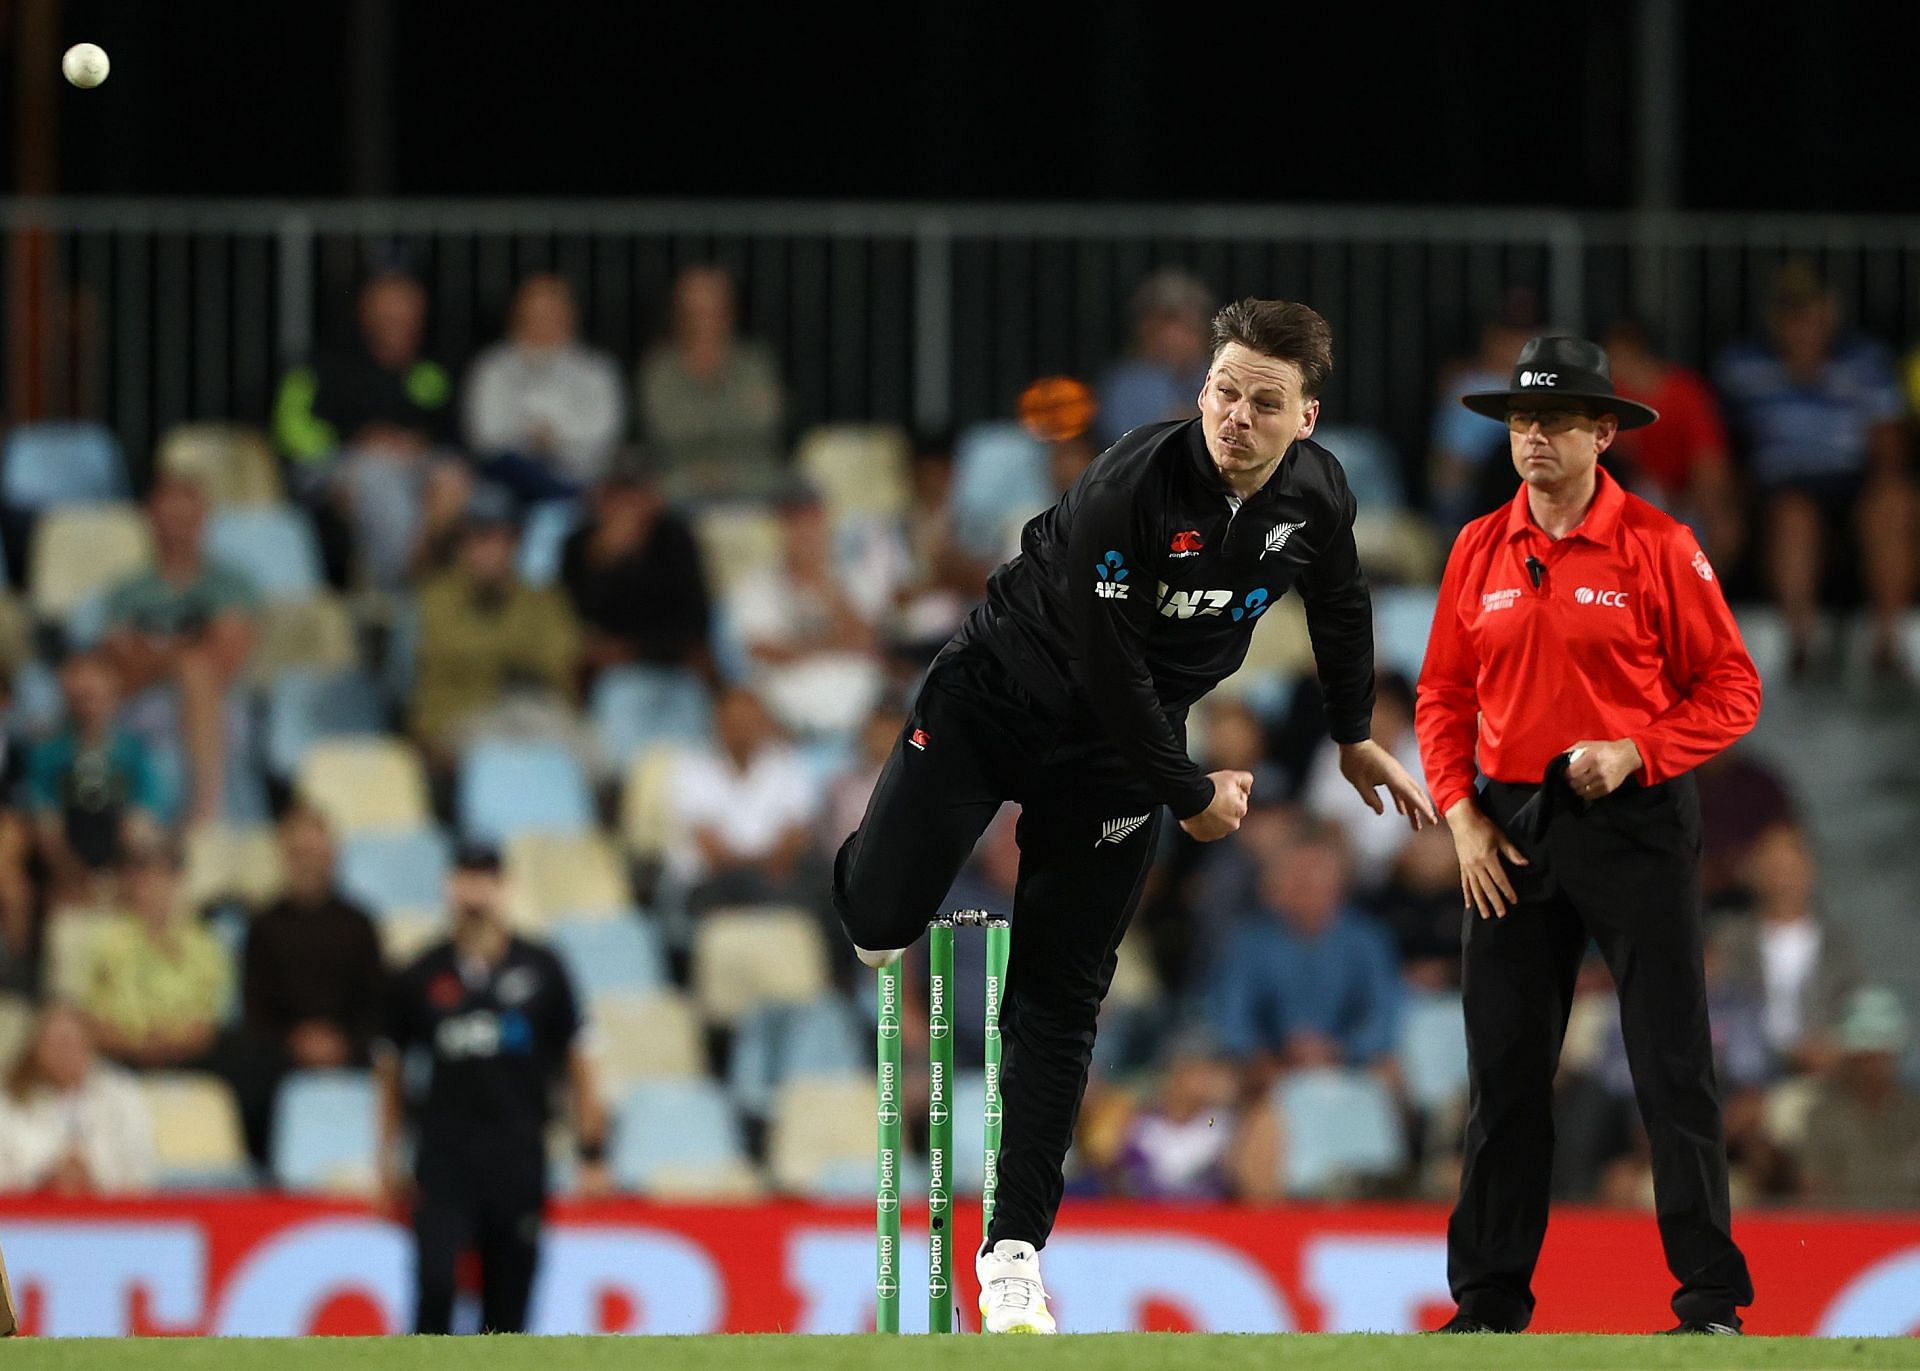 Michael Bracewell ruptured his right Achilles during the T20 blast. (Pic: Getty Images)